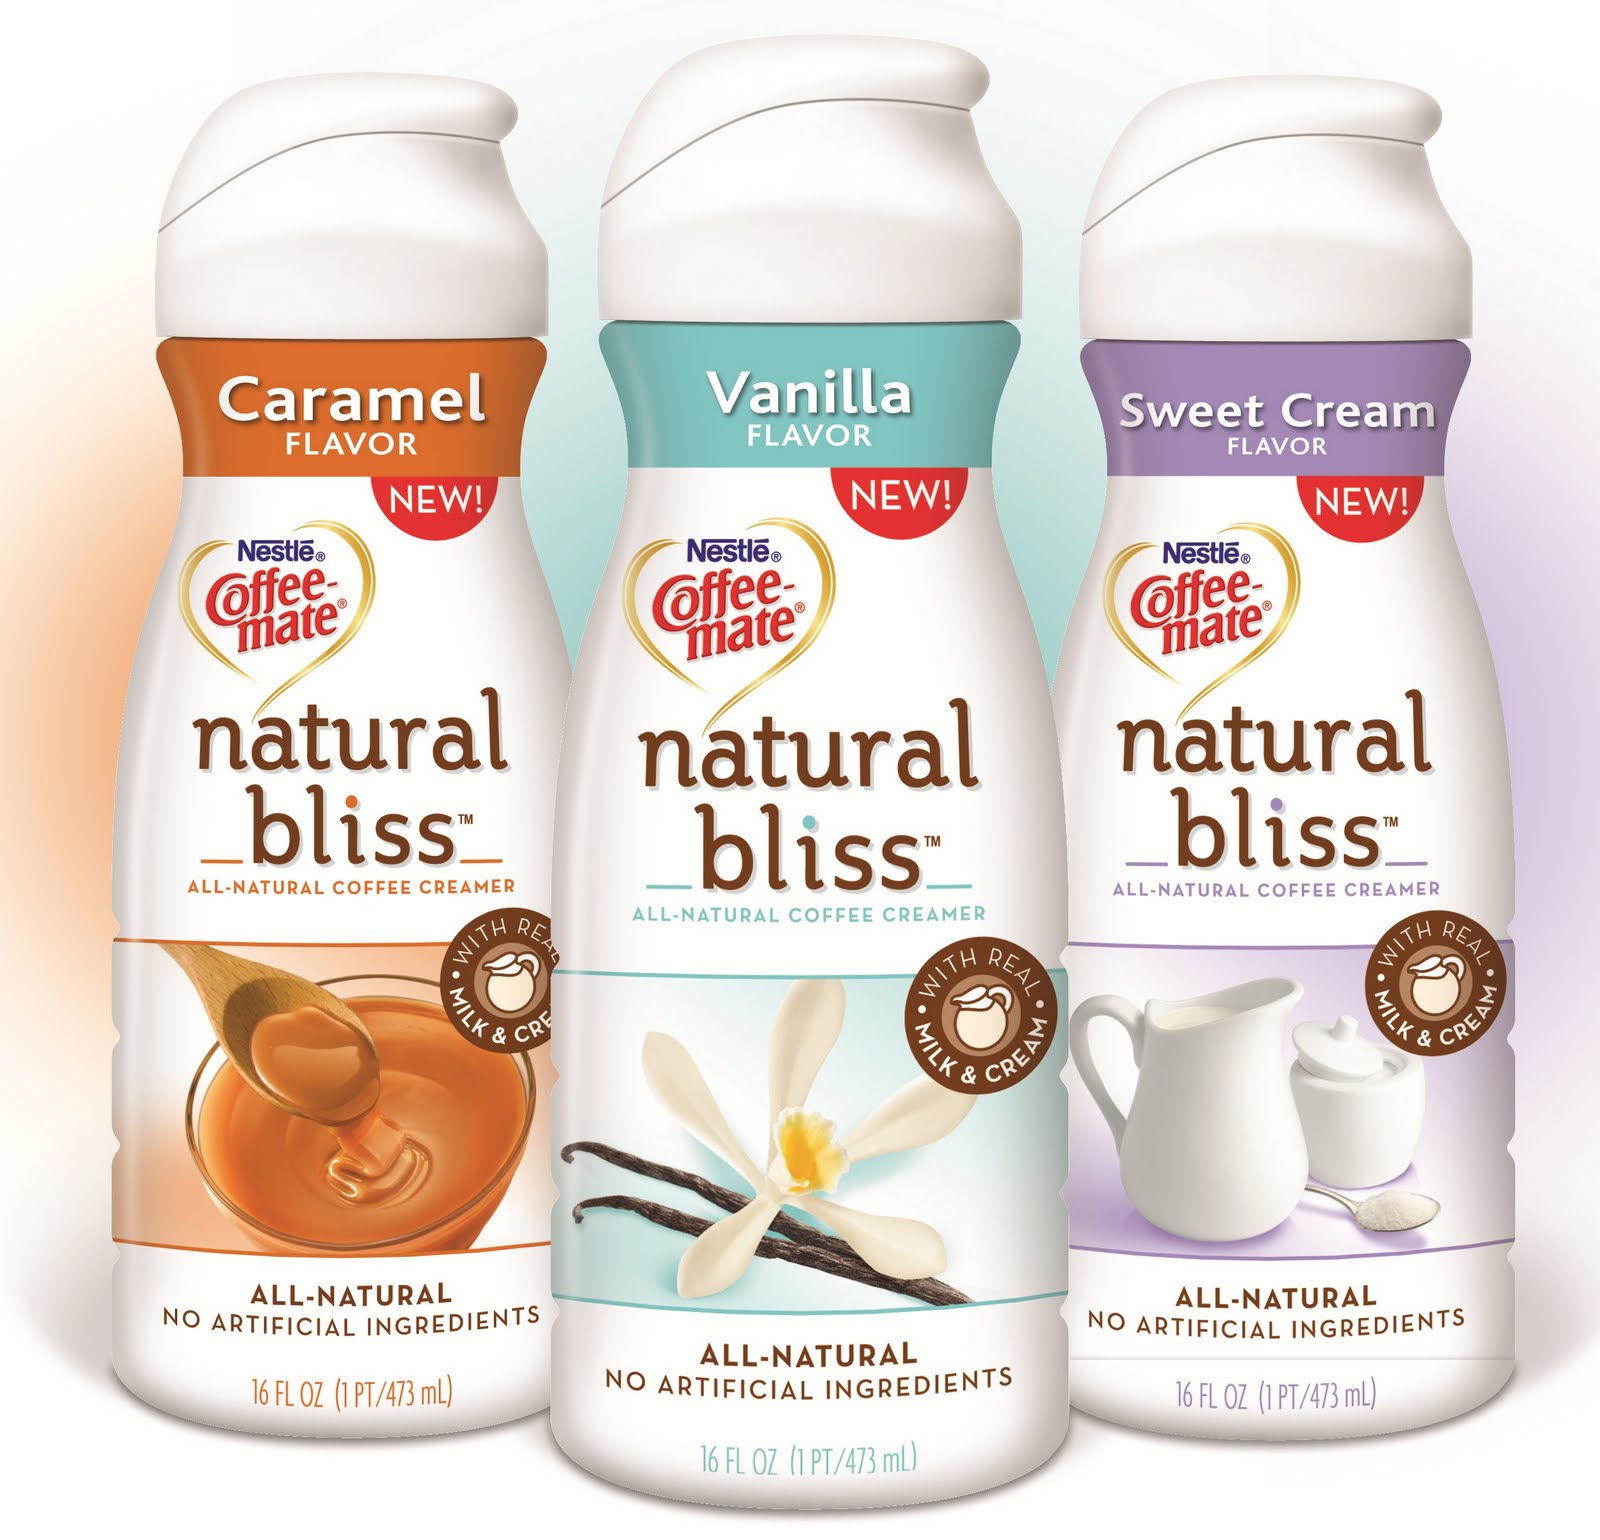 75¢ Coffee-Mate Natural Bliss Coupon!